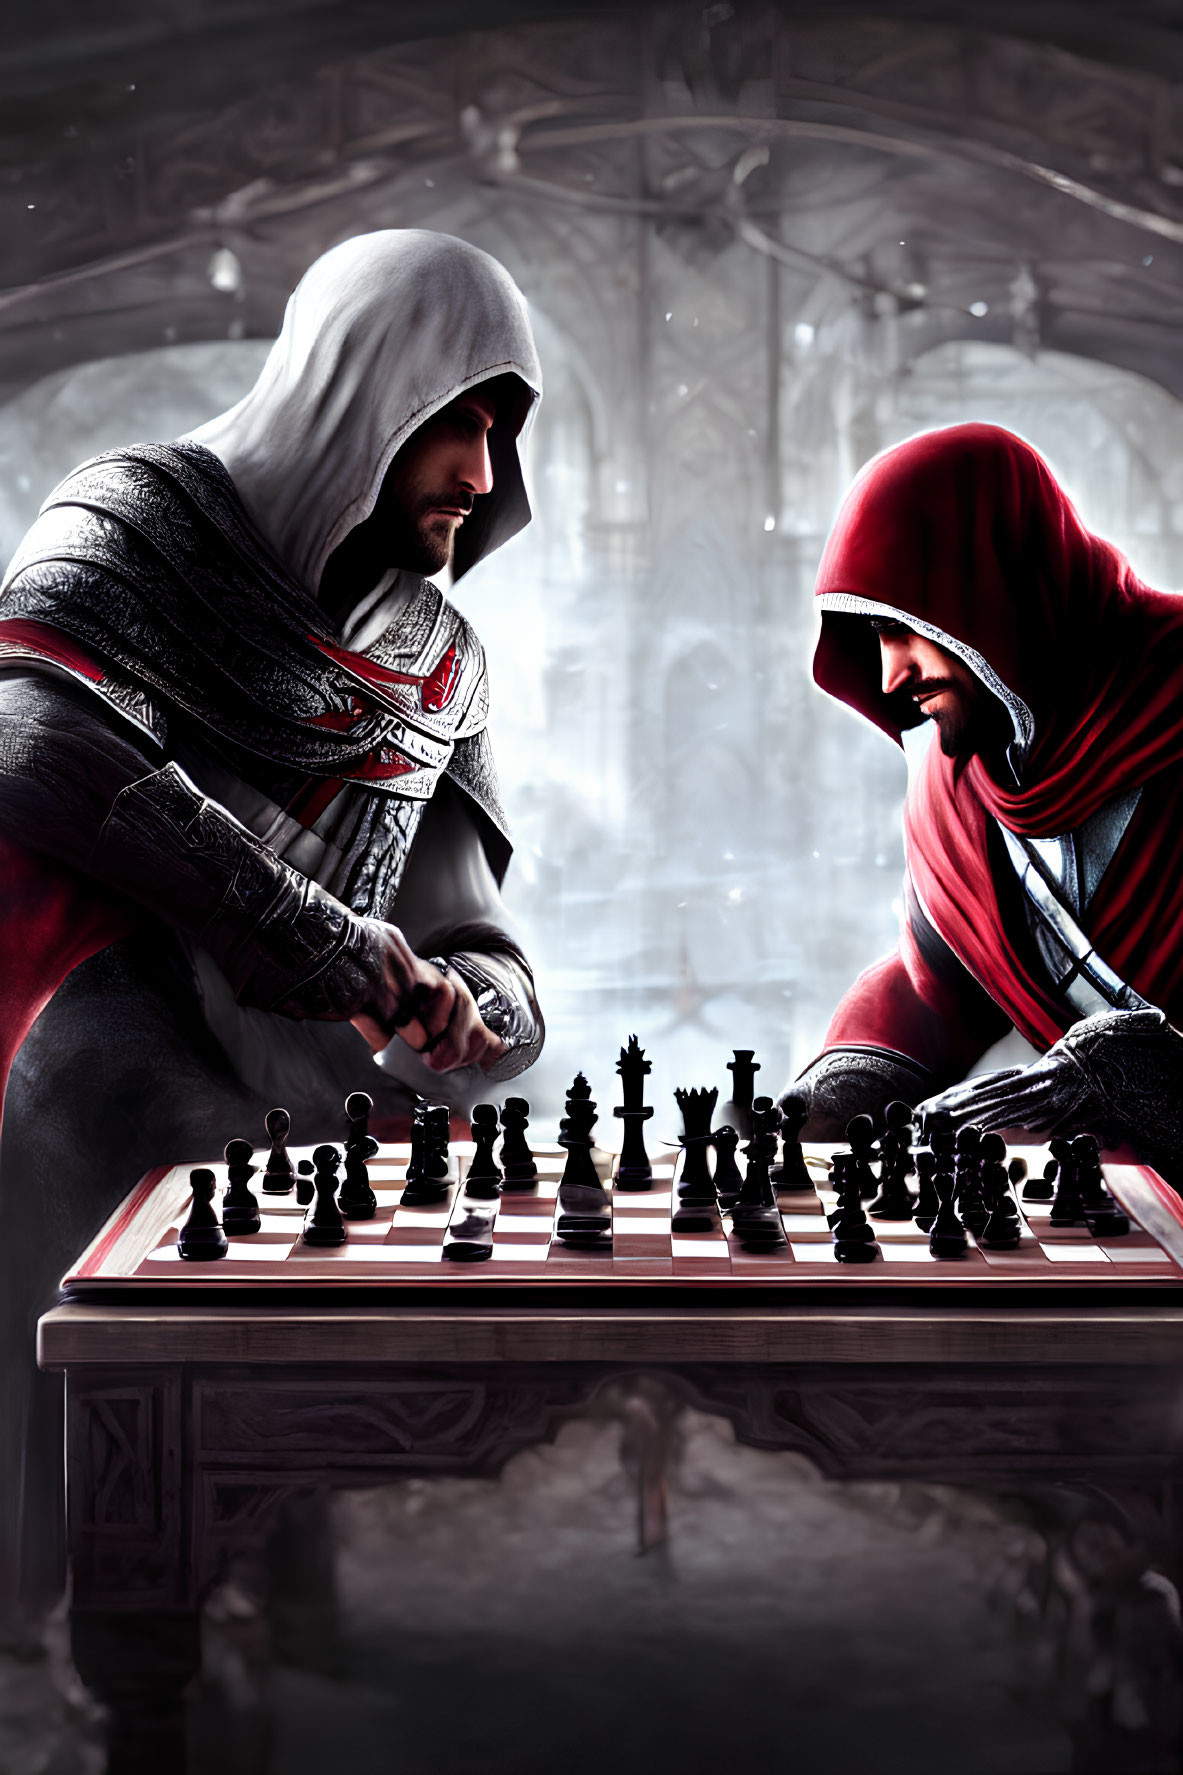 Hooded figures play chess in gothic setting